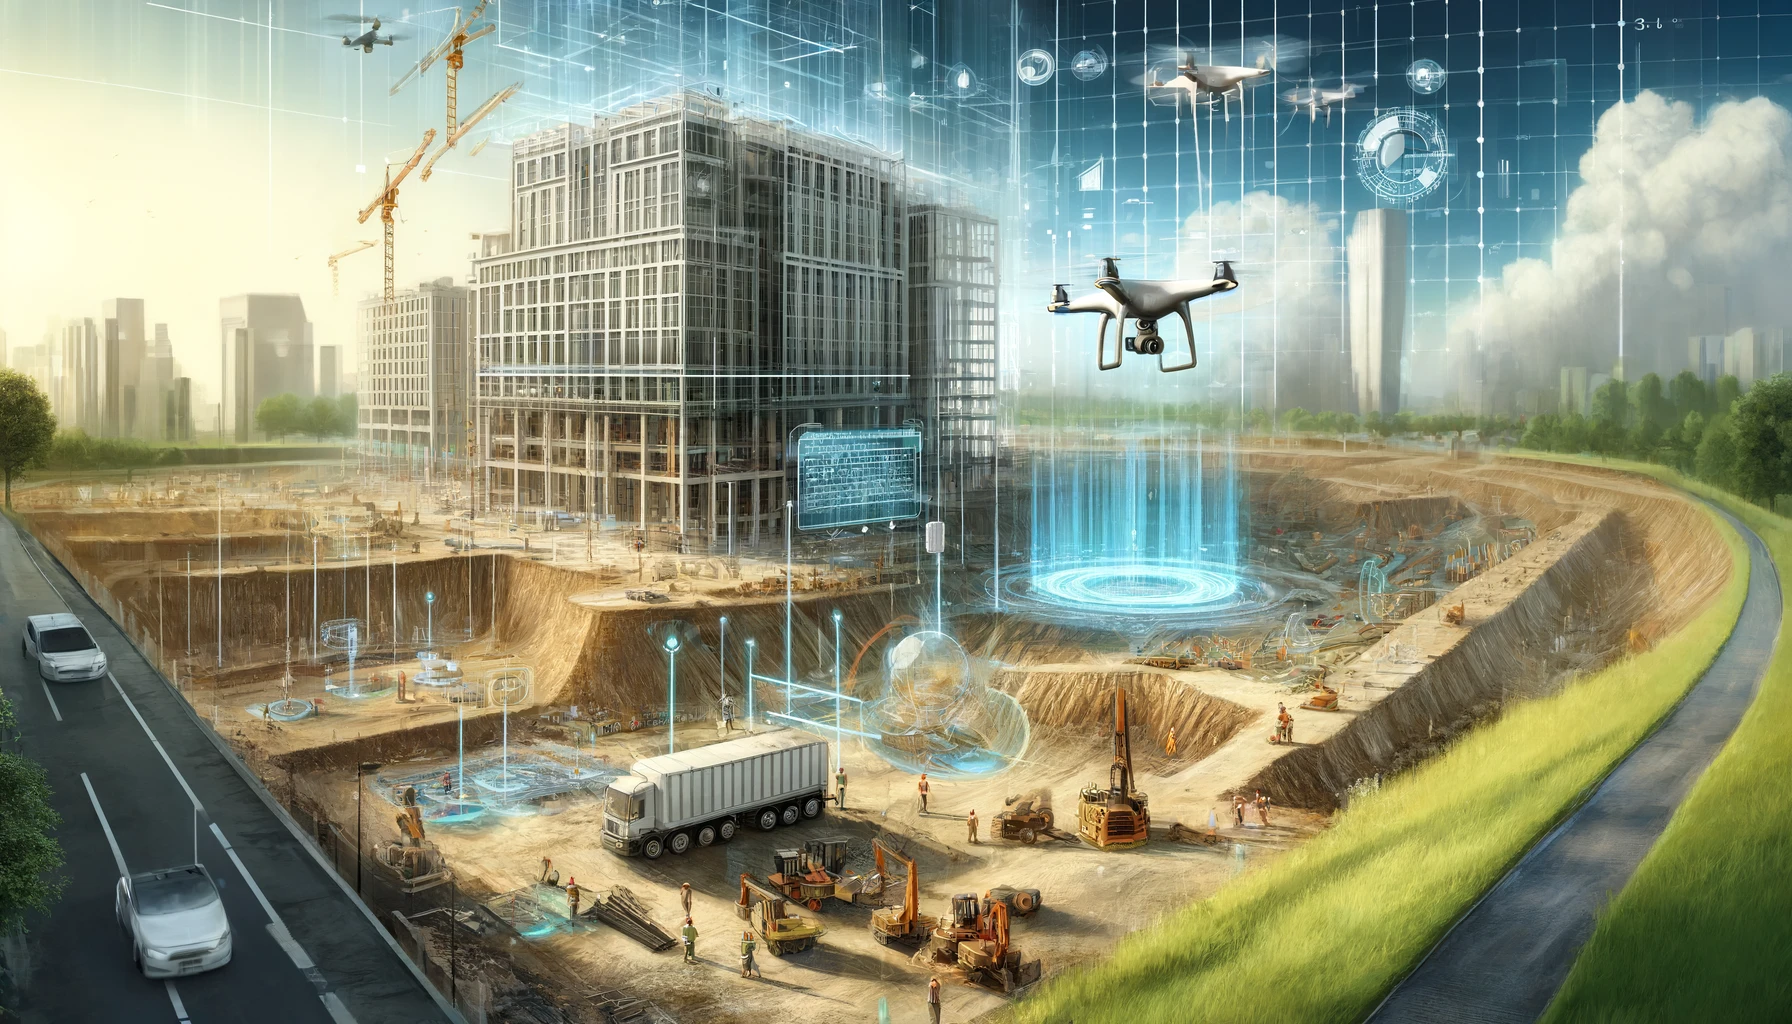 Here is the illustration for the article about how a construction company used AI to achieve precise soil volume measurements and significant cost savings on a large office building project. The digital painting features drones and workers with 360° cameras actively engaged in the task.